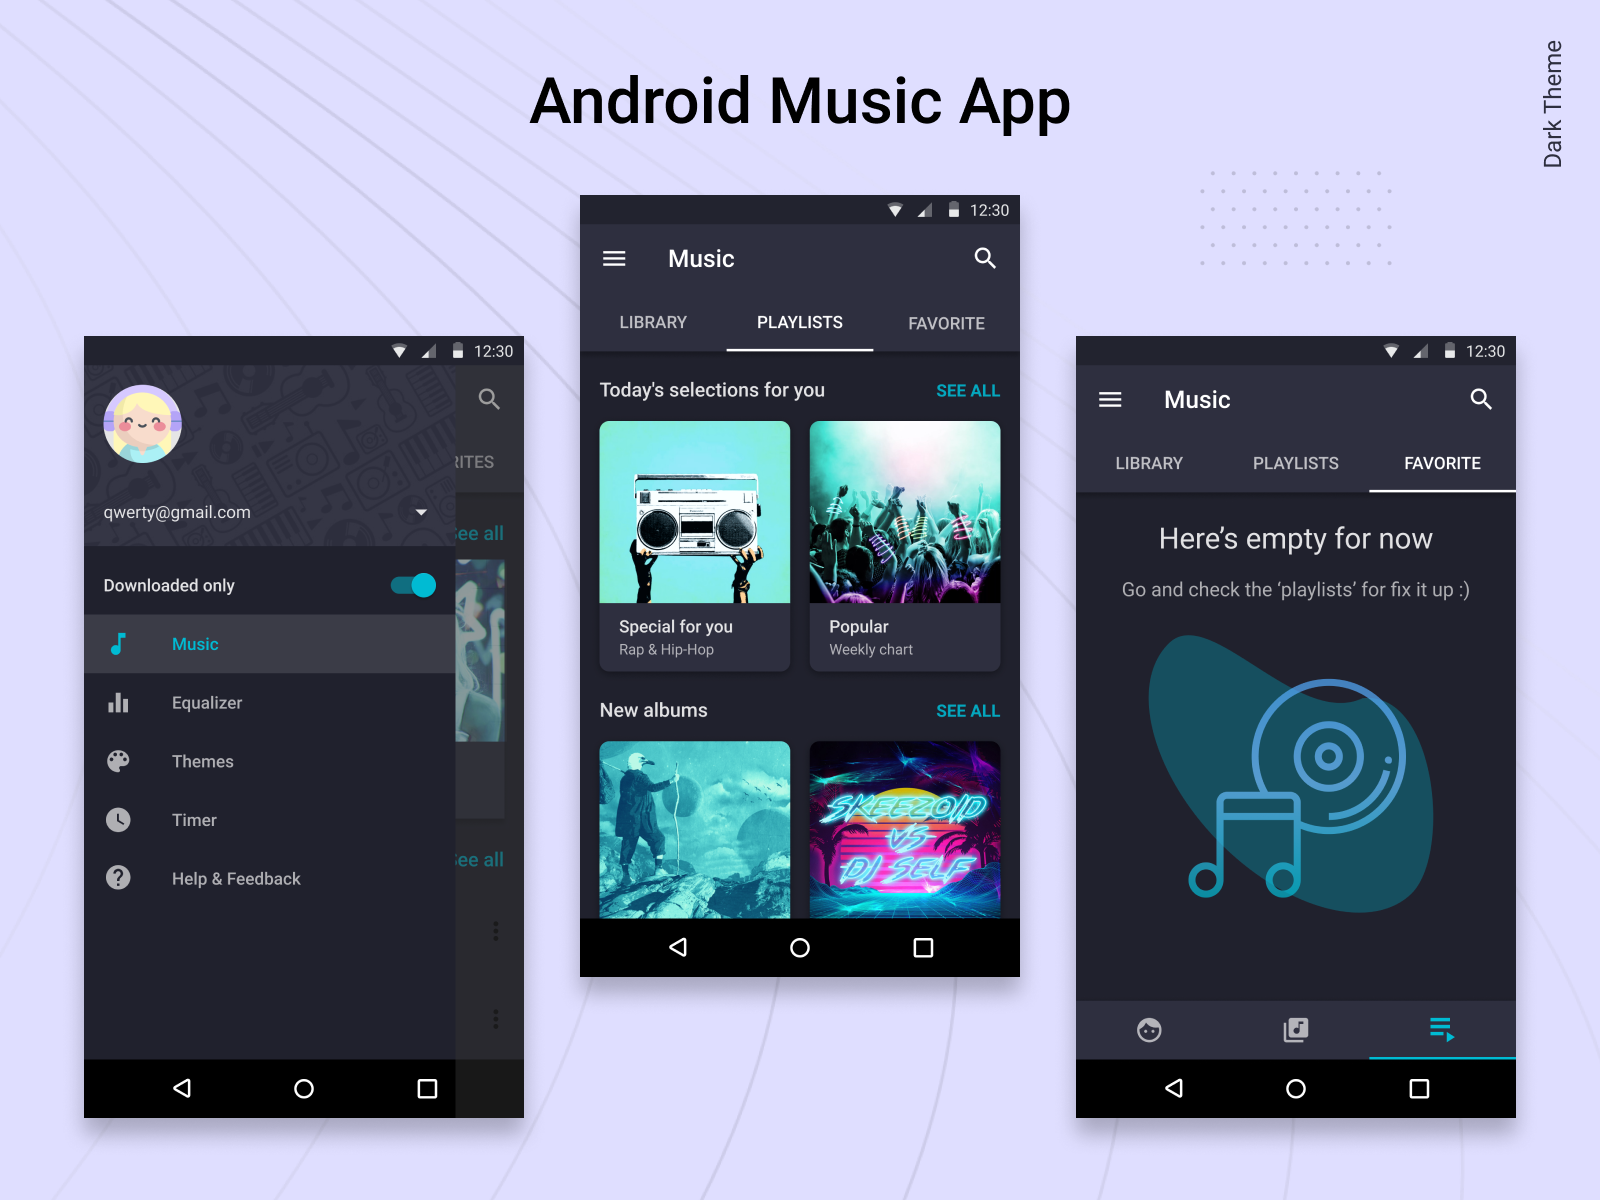 Android Music Player App The Dark Theme by Kate on Dribbble